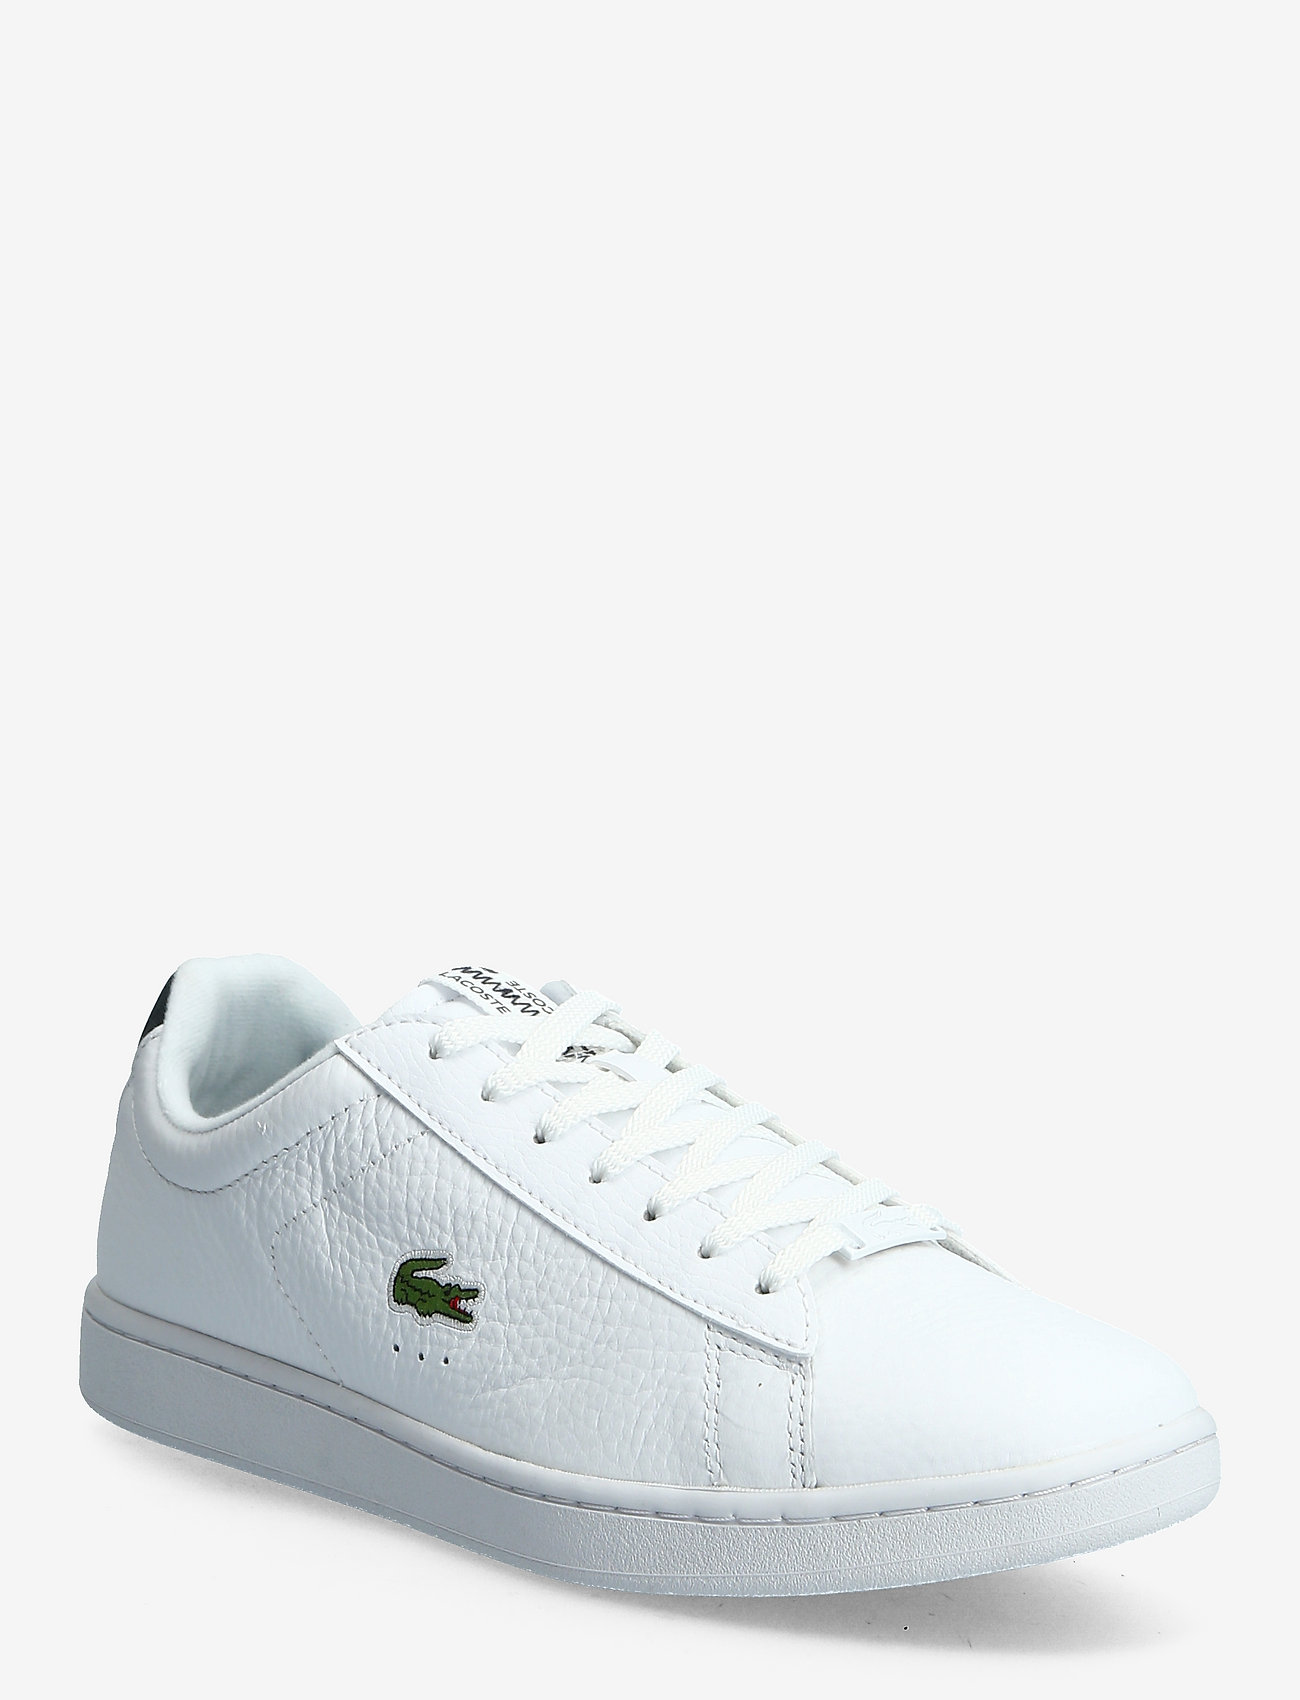 Lacoste Shoes Carnaby Evo 05211sma - Low Tops | Boozt.com